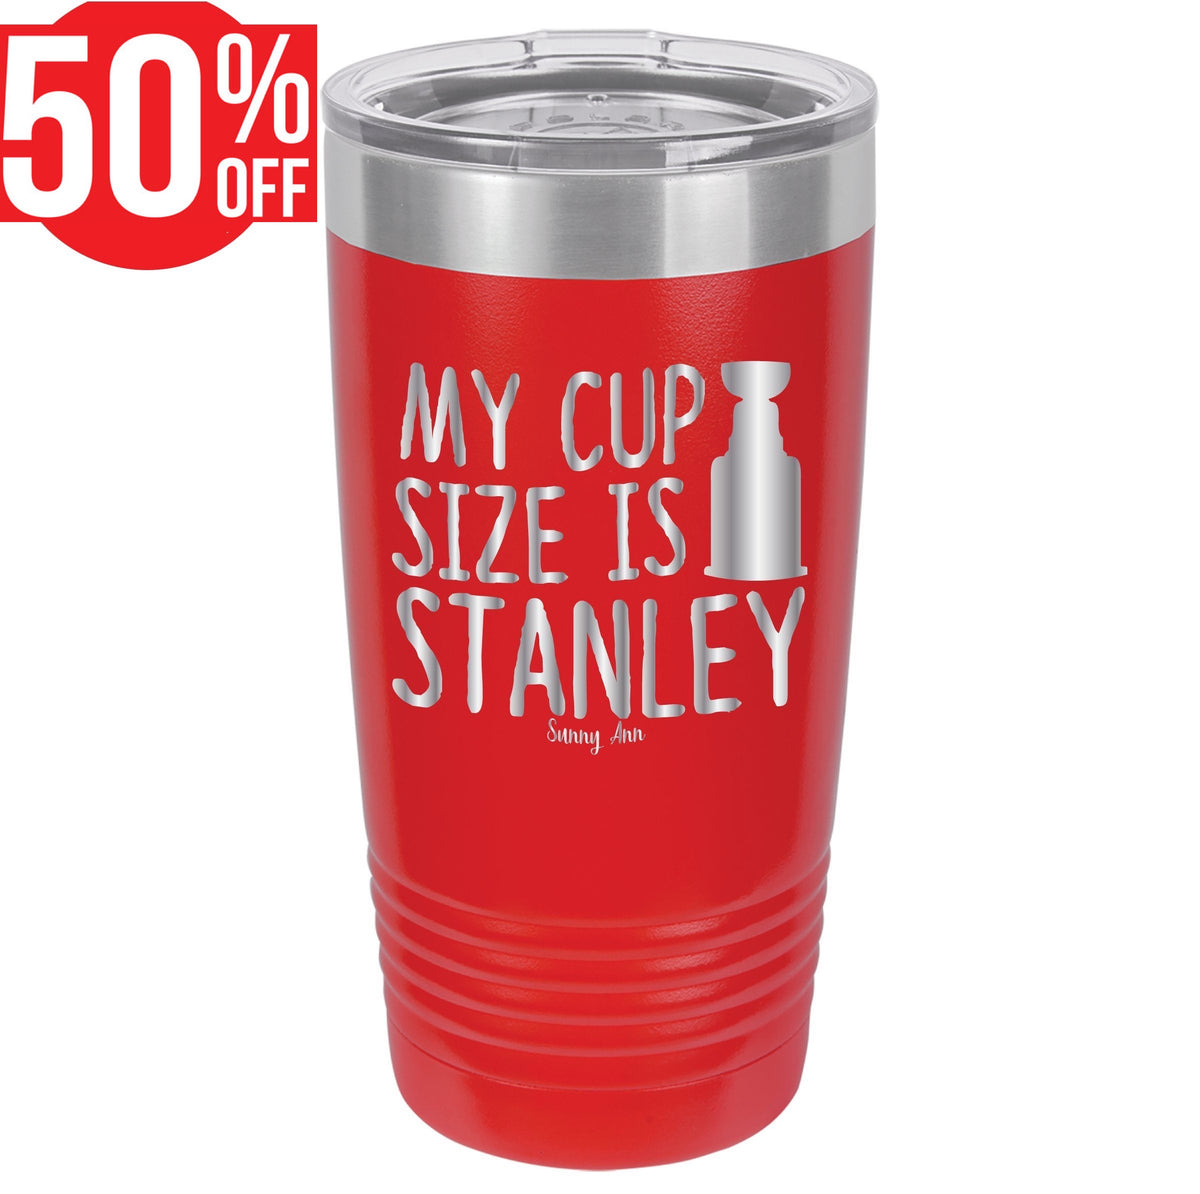 Stanley Cups & Tumblers – Occasionally Yours